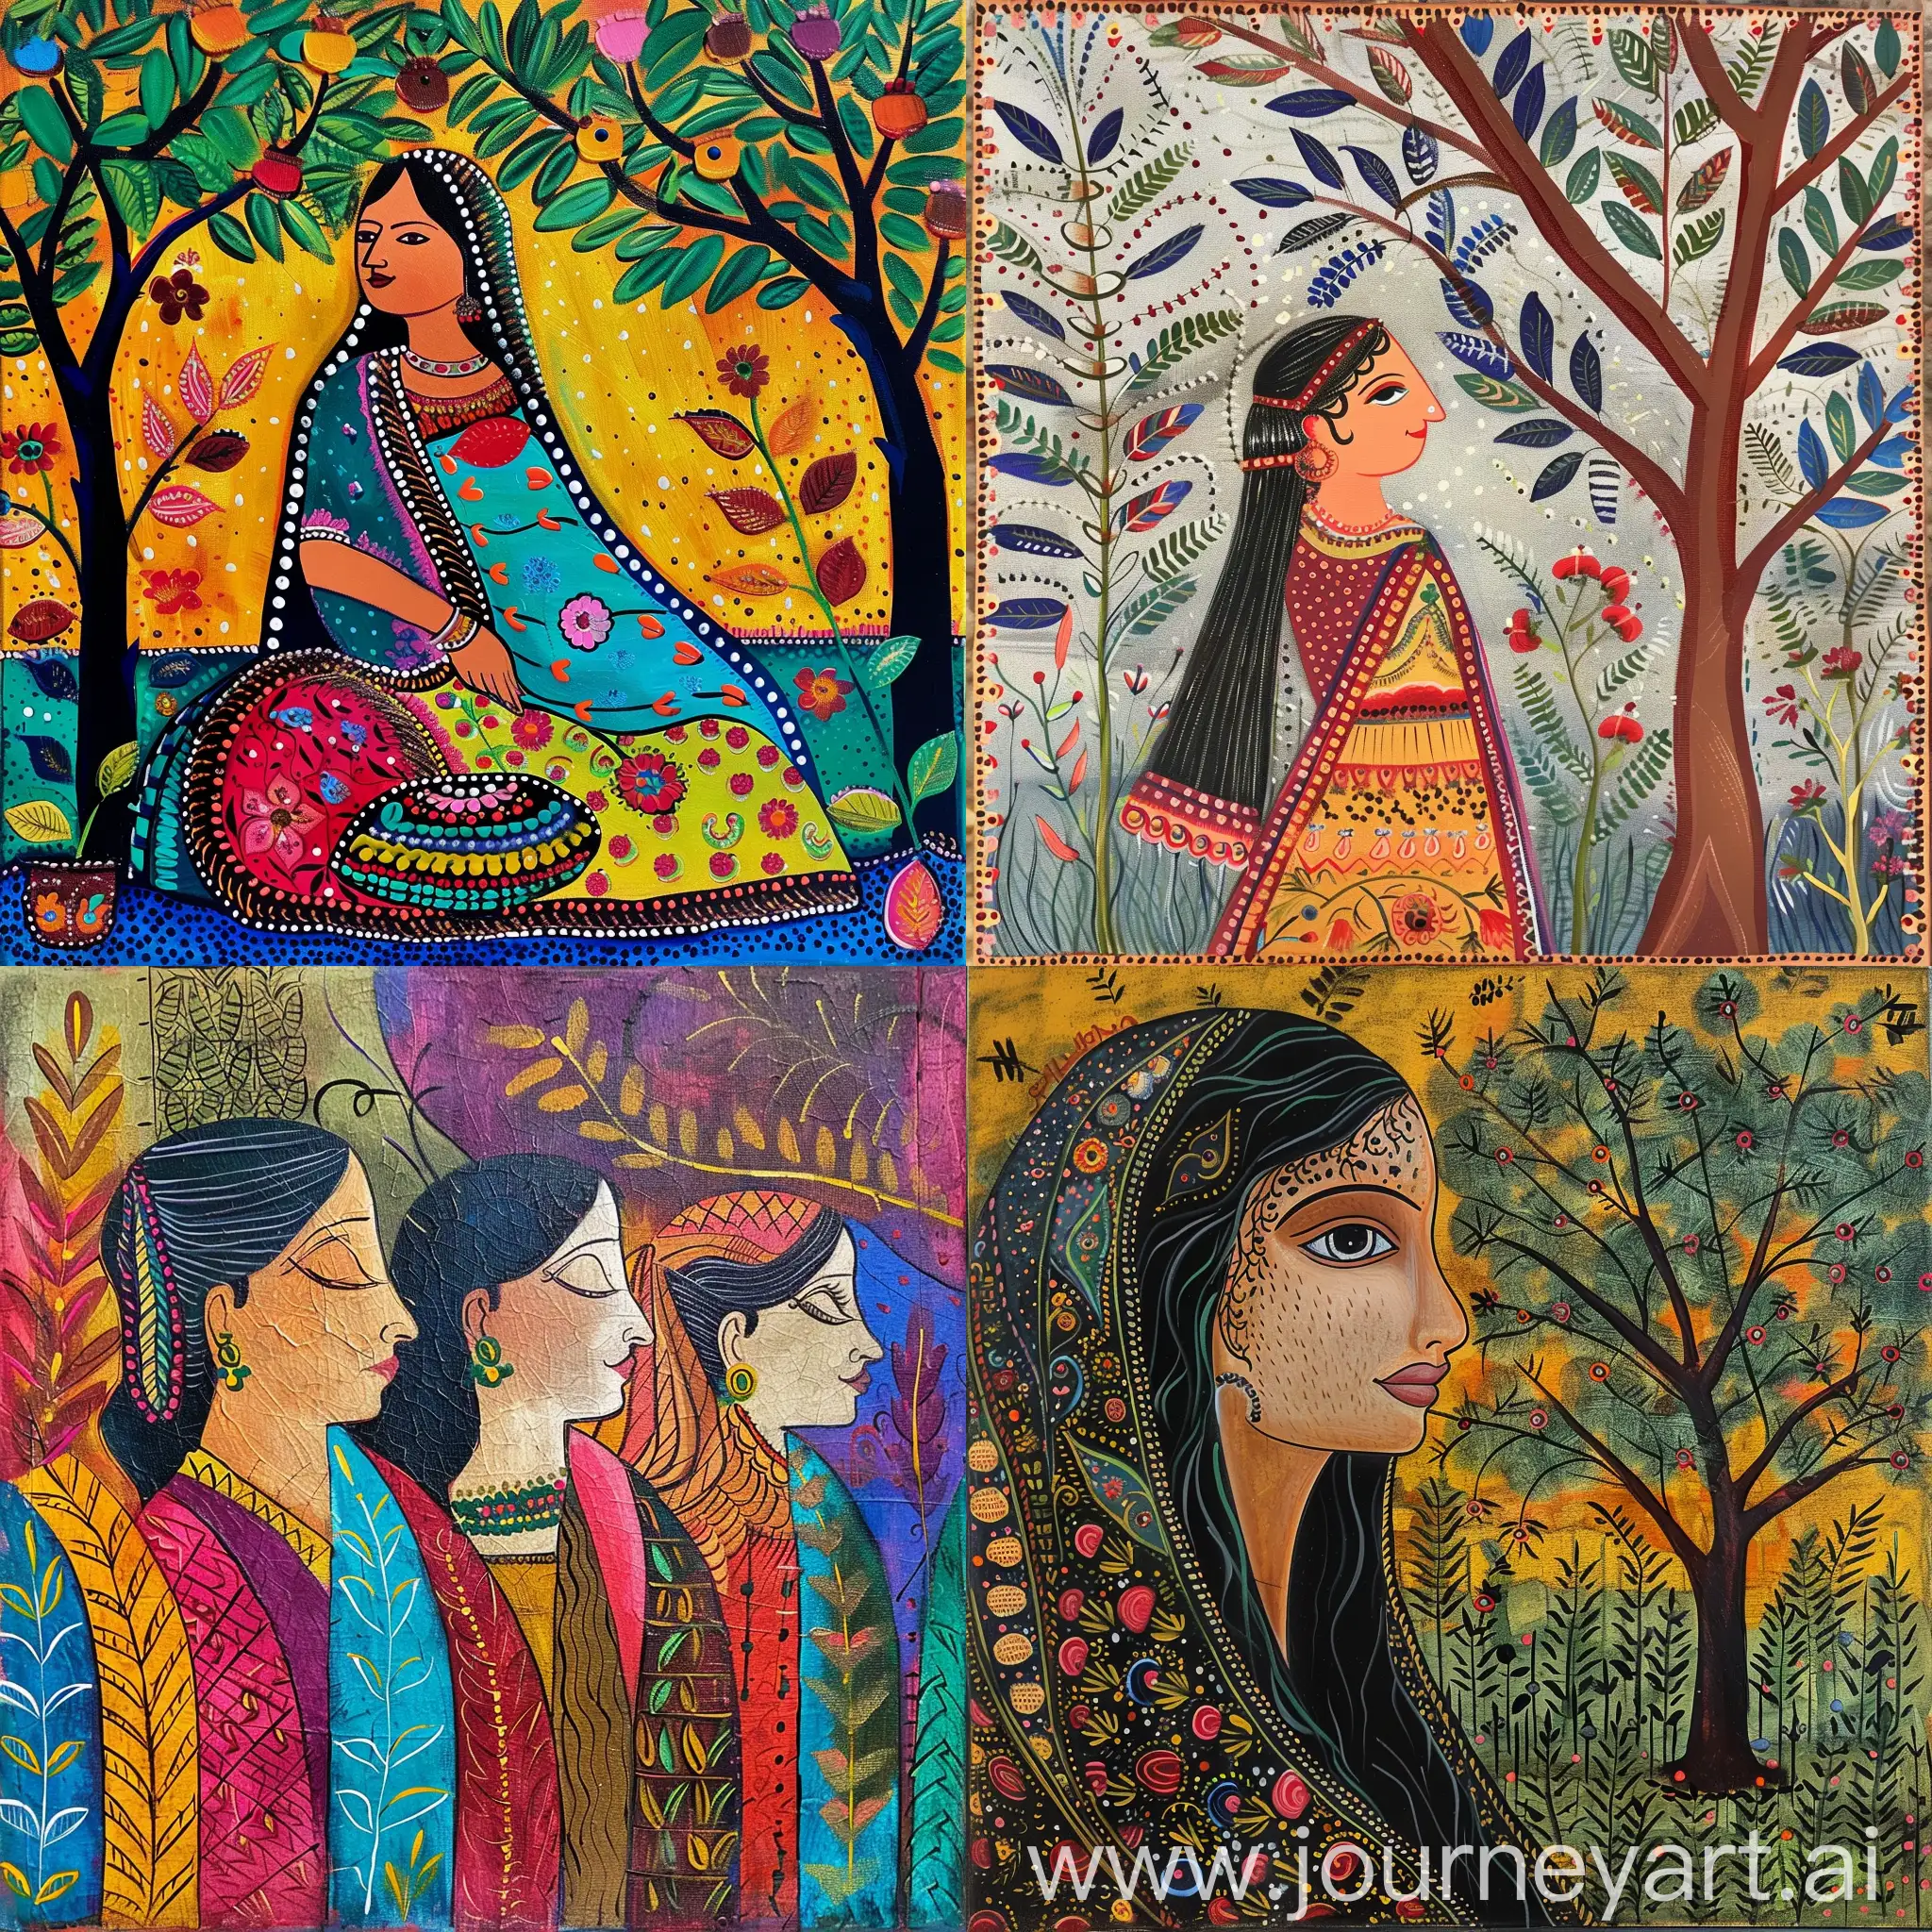 Generate an painting on women empowerment showing beauty of women her struggle esthetic vibe a tittle more type of a wavy artistic mixture of warli , madhubani ,mithila painting